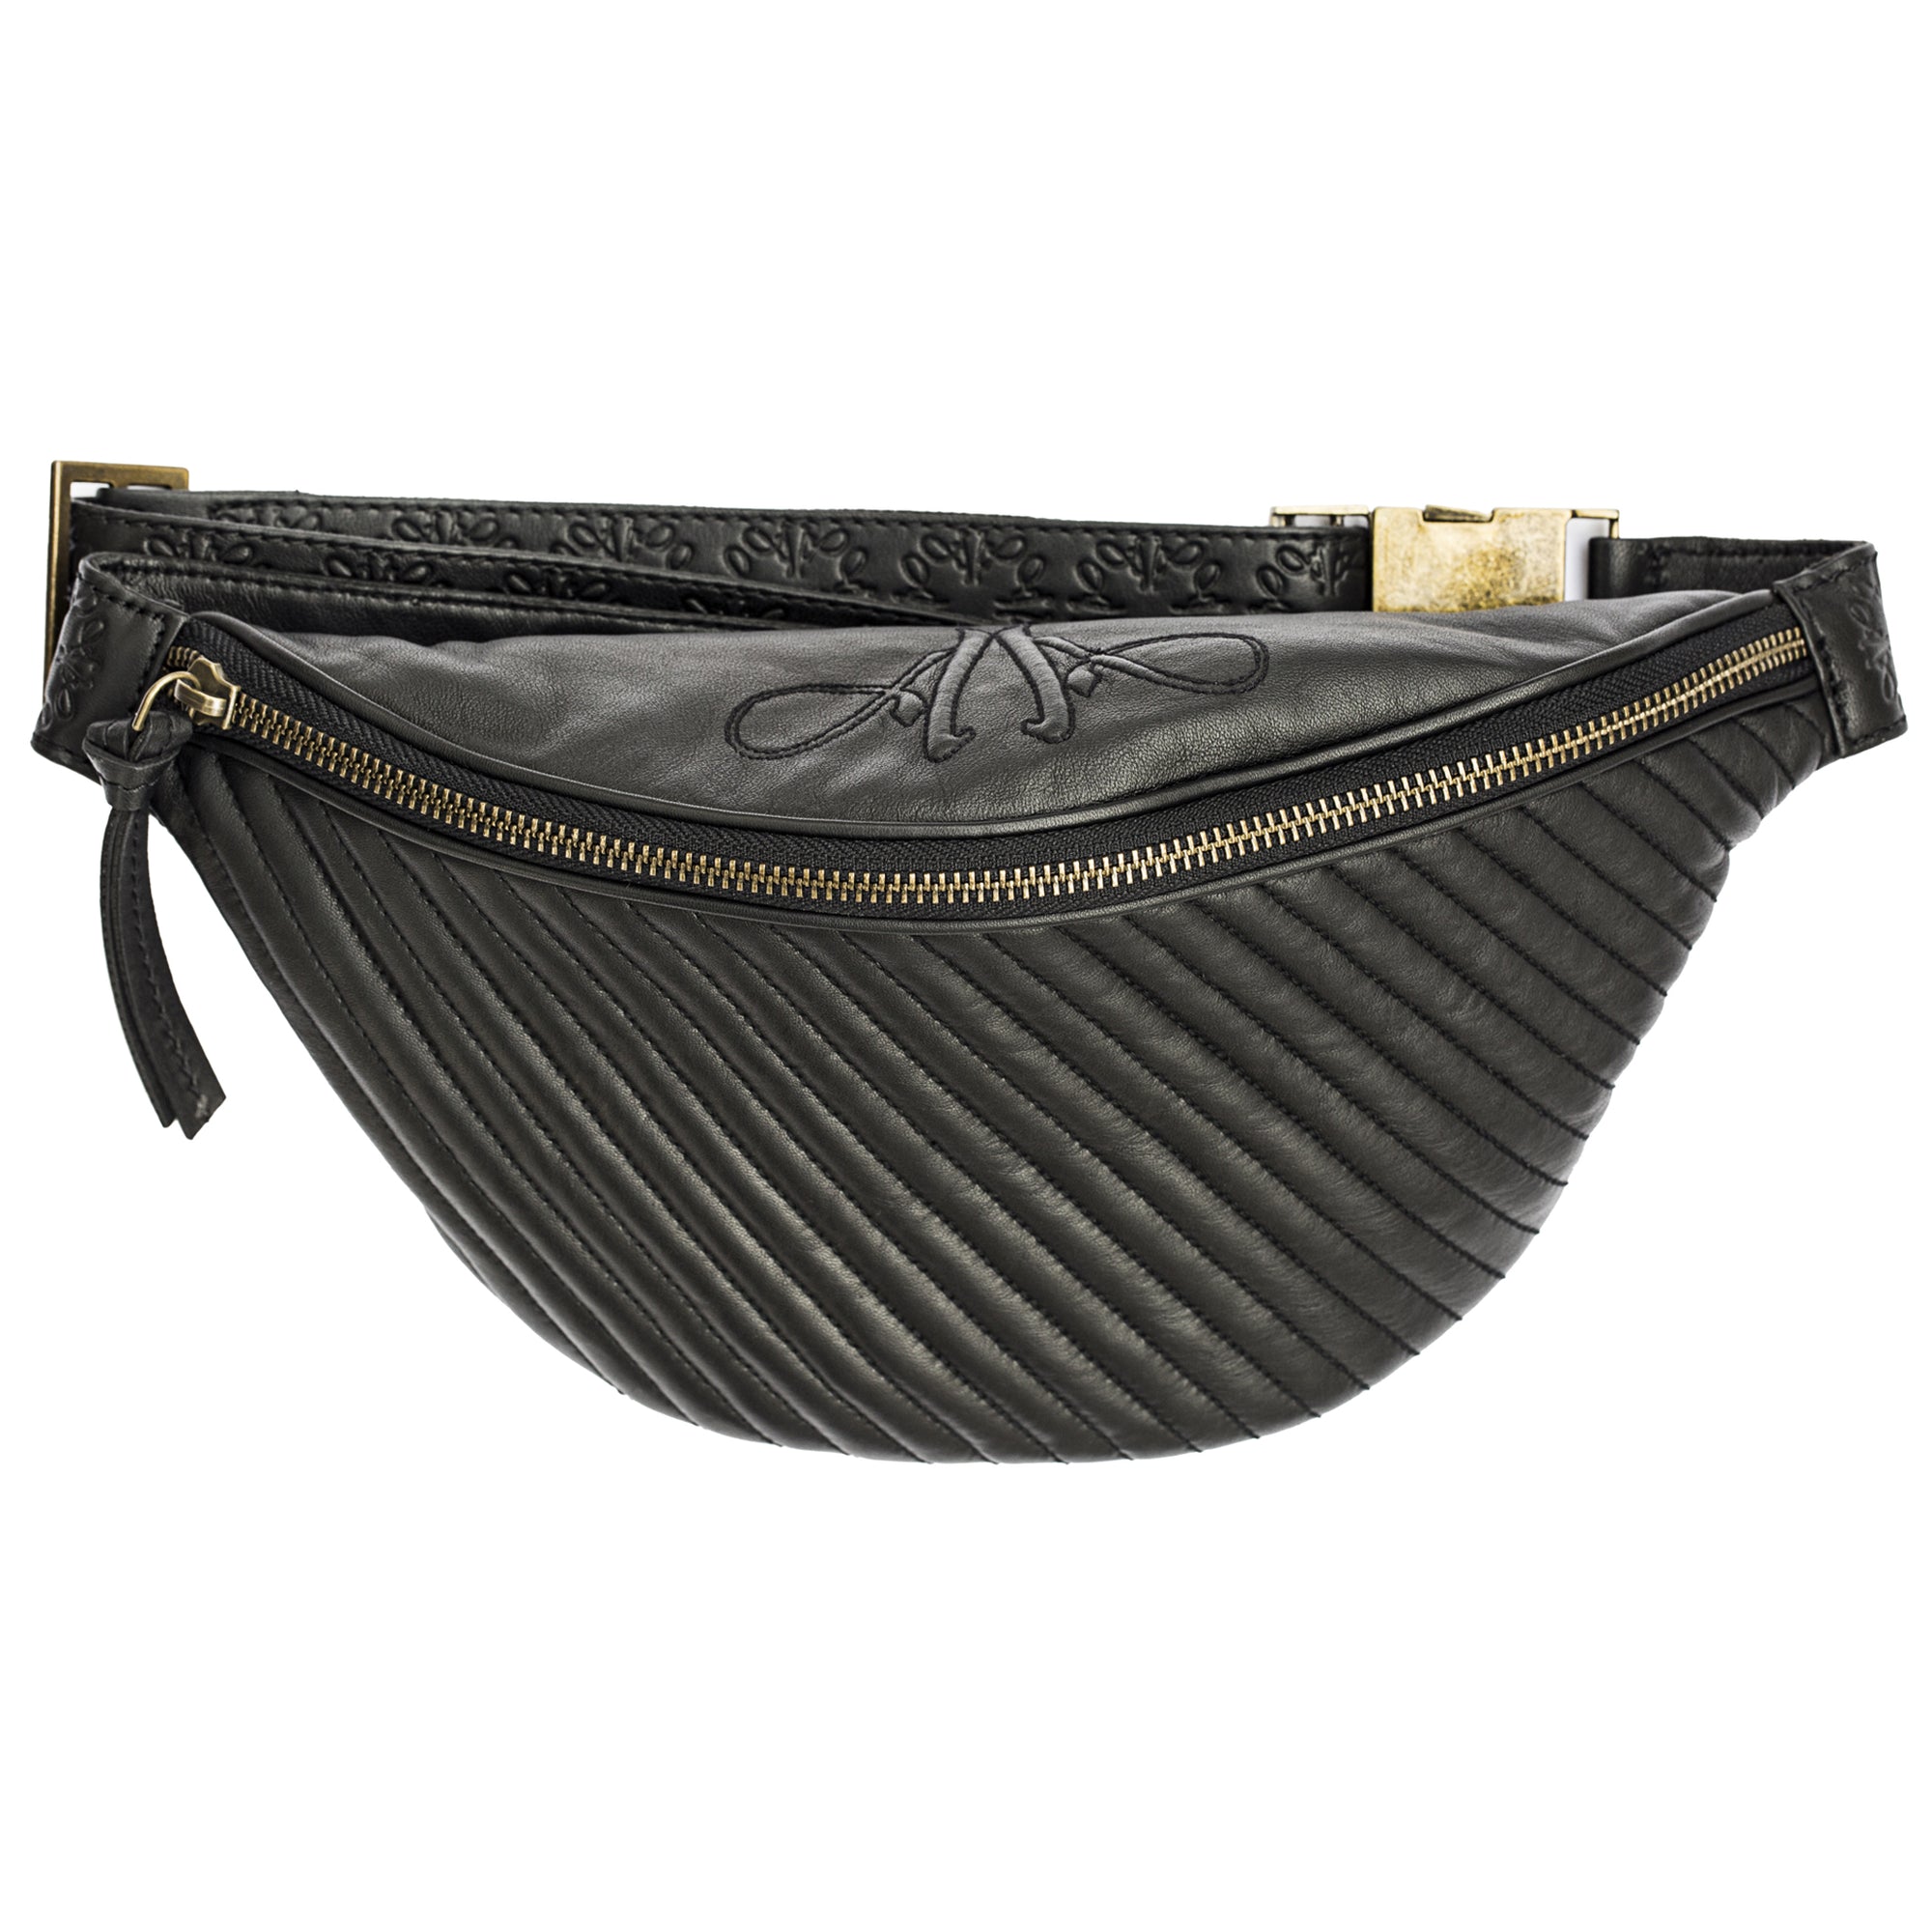 AndreA - Leather Fanny Pack